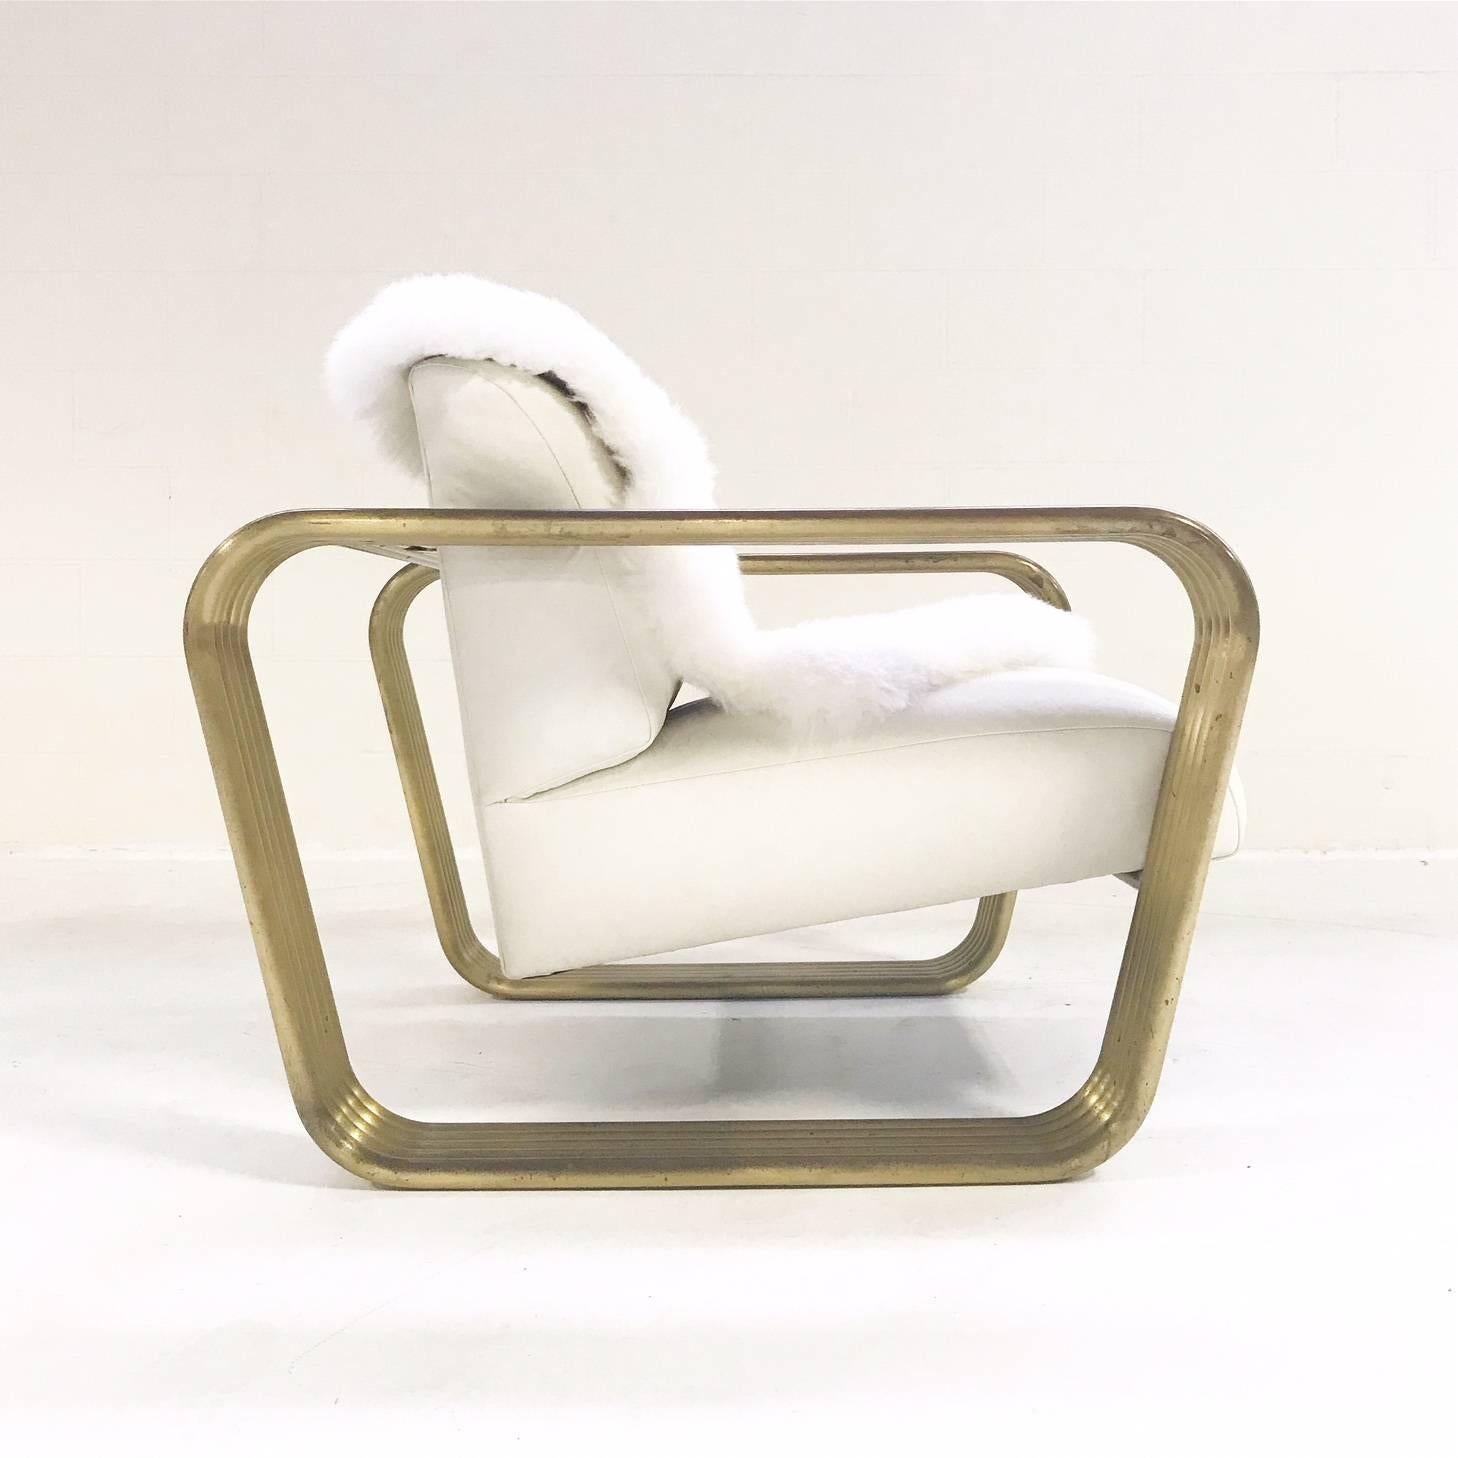 This Art Deco style Jay Spectre lounge chair (circa 1975) is in such excellent vintage condition we didn't even wanna touch it!  The tubular brass is perfectly worn and perfectly stellar, the white leather is supple and smooth.  The only our touch